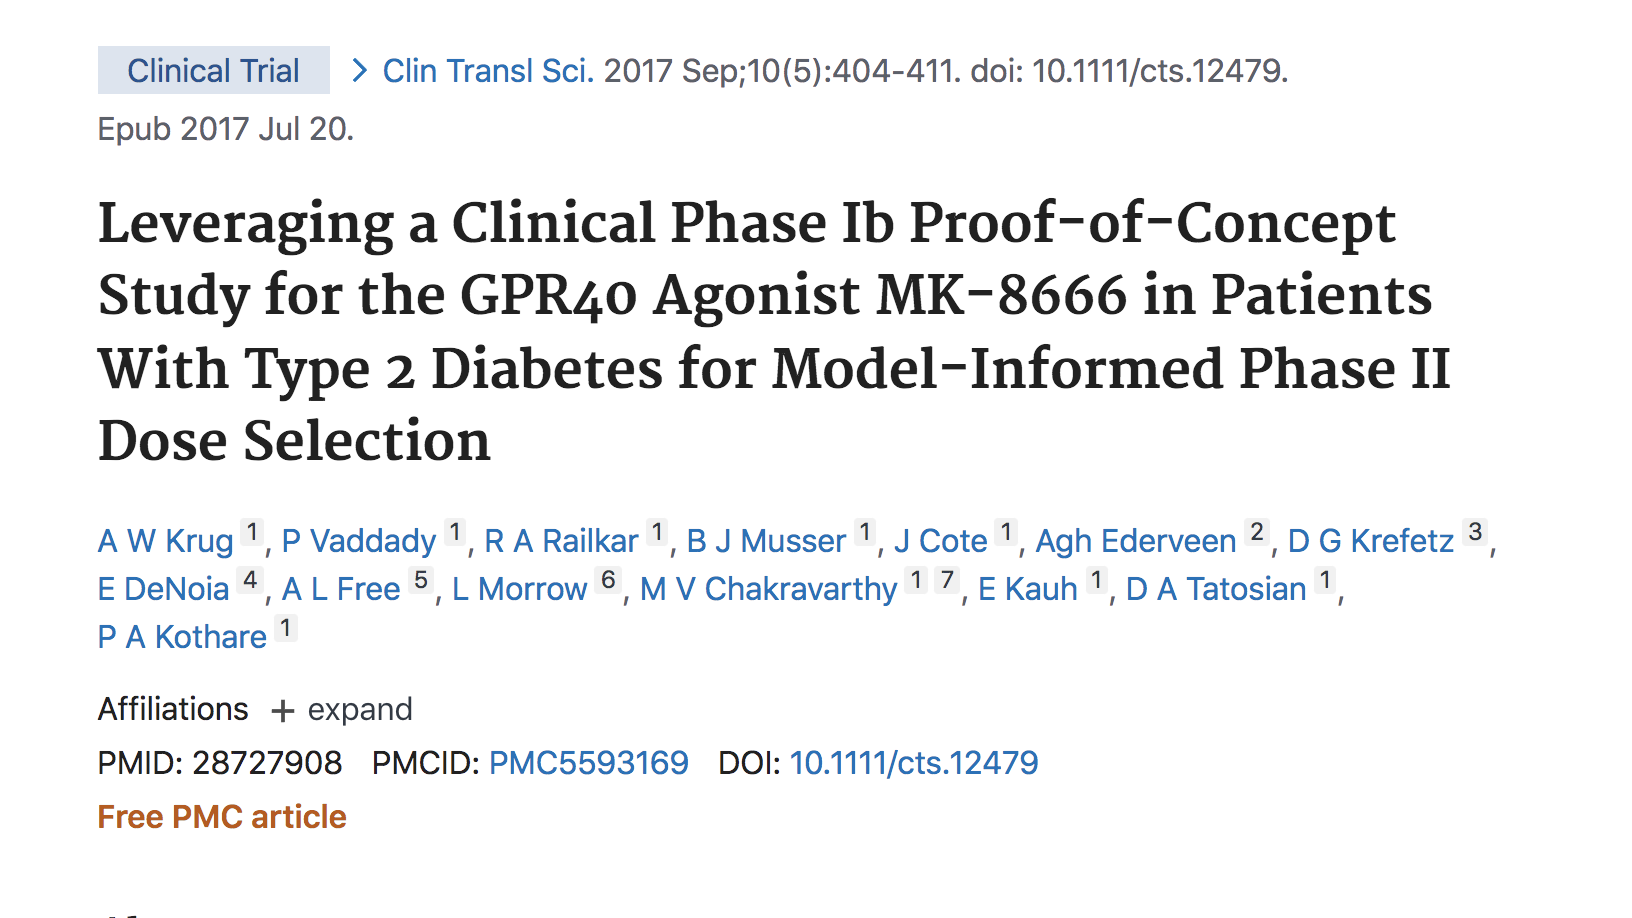 image of Leveraging a clinical phase Ib proof-of-concept study for the GPR40 agonist MK-8666 in patients with type 2 diabetes for model-informed phase II dose selection.